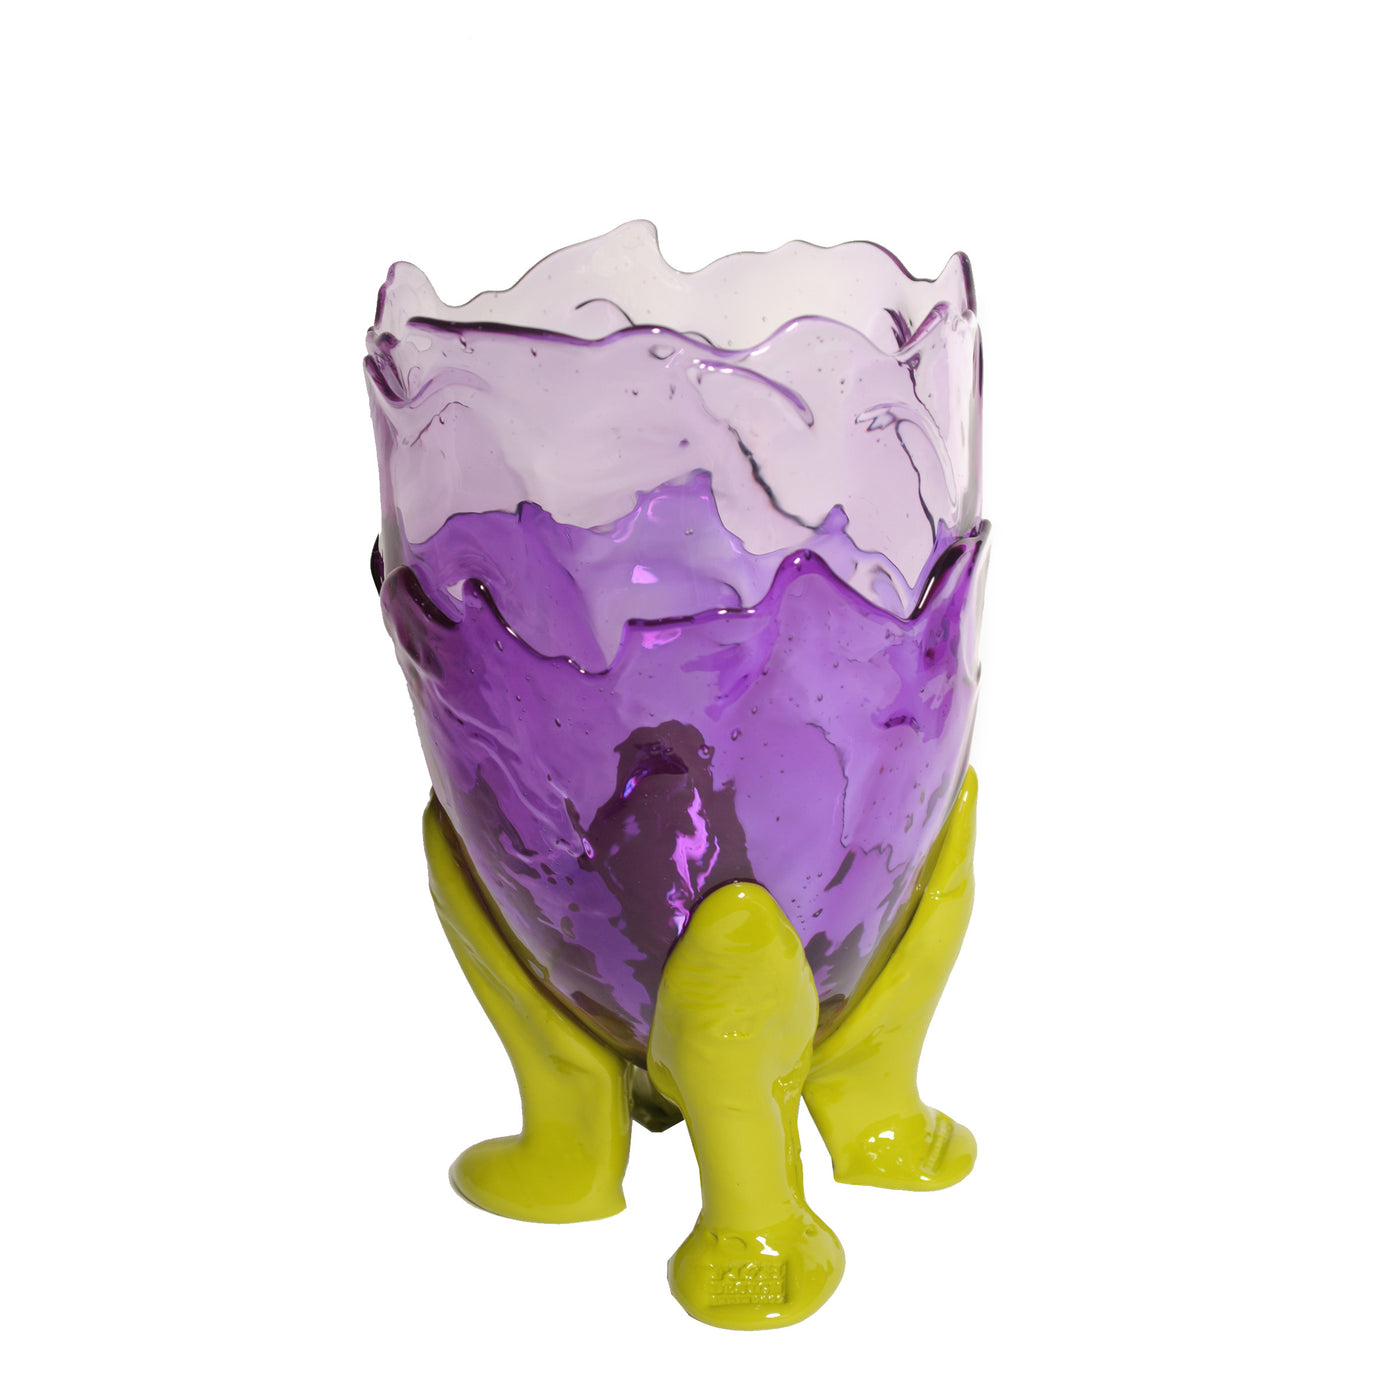 Resin Vase CLEAR EXTRACOLOUR Purple by Gaetano Pesce for Fish Design 03